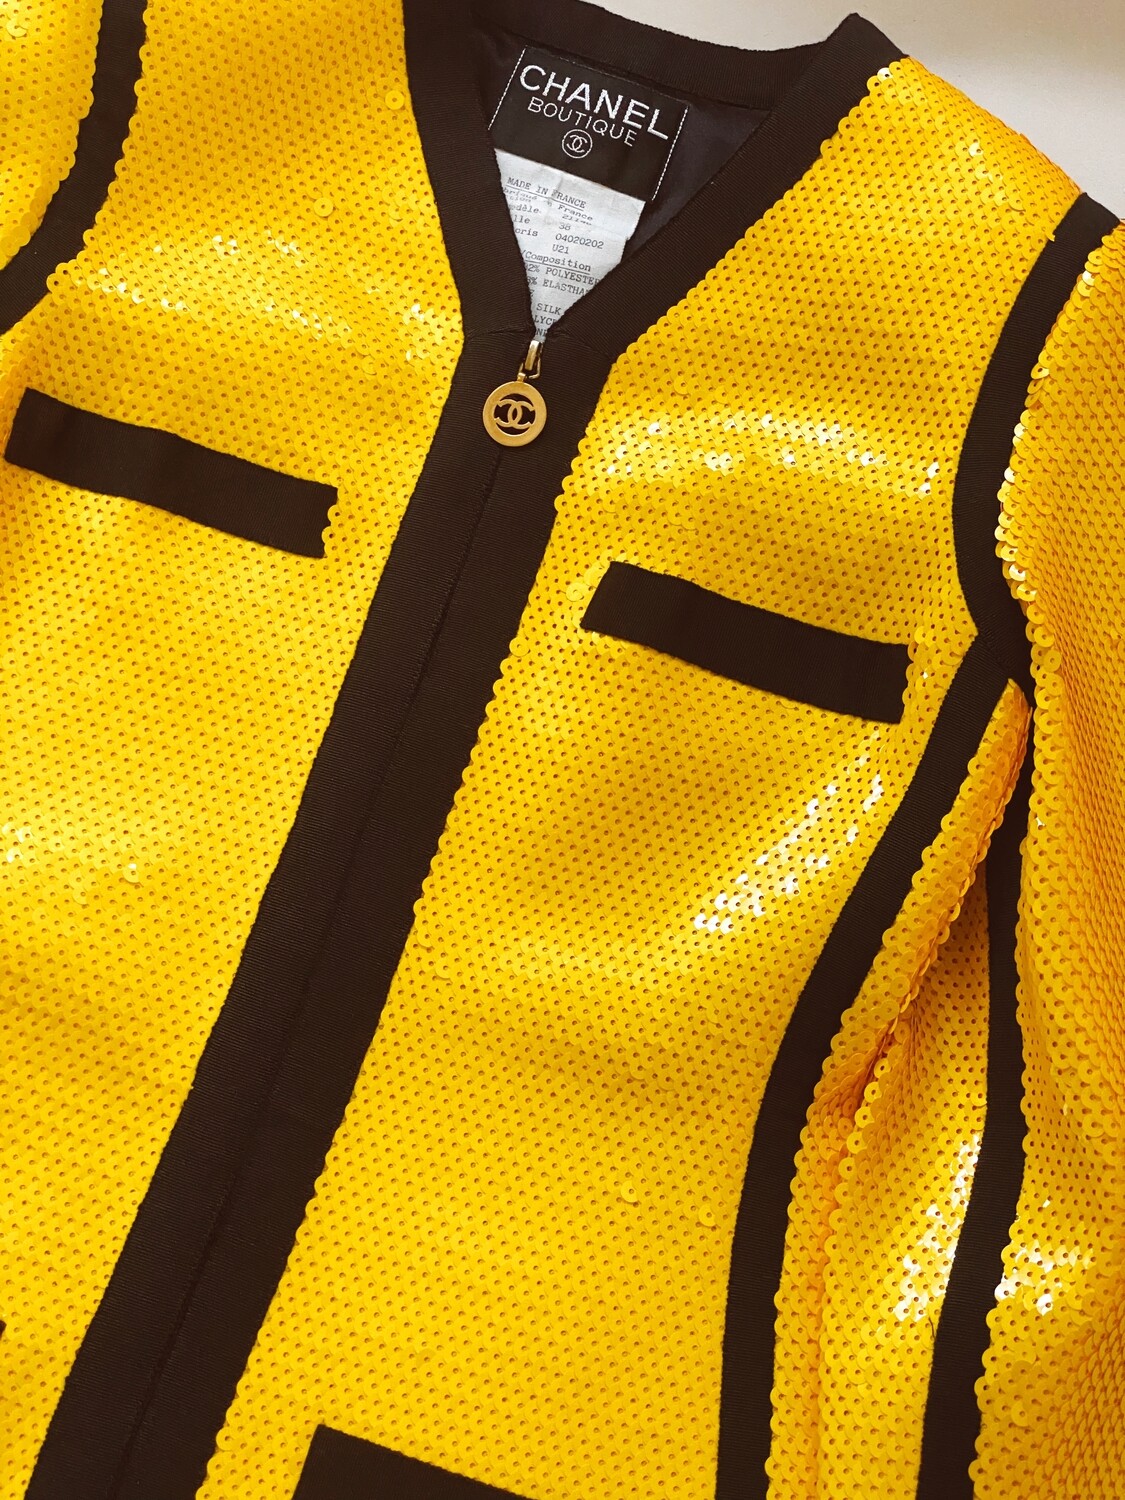 CHANEL CC LOGO YELLOW SEQUIN SCUBA JACKET BLAZER FR 38 / US 4 - ICONIC 1991 CHANEL COLLECTION